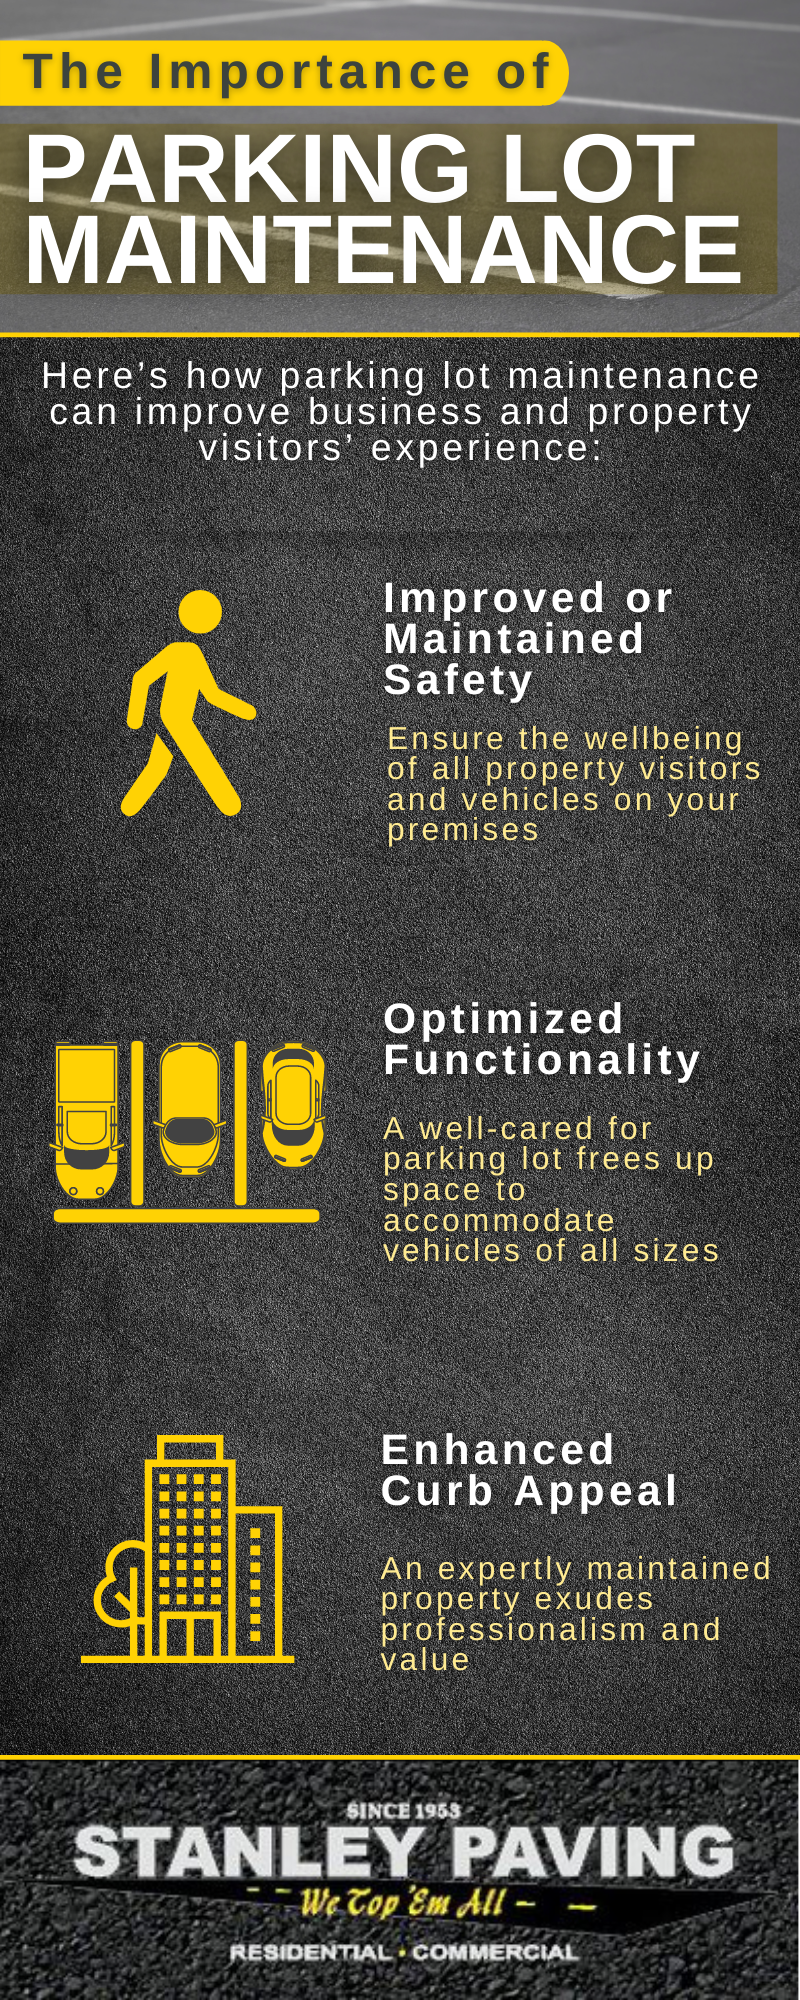 An infographic says, "The importance of parking lot maintenance. Here's how parking lot maintenance can improve business and property visitors' experience: Improve or Maintained Safety; Optimized Functionality; Enhanced Curb Appeal." The Stanley Paving logo is at the bottom.